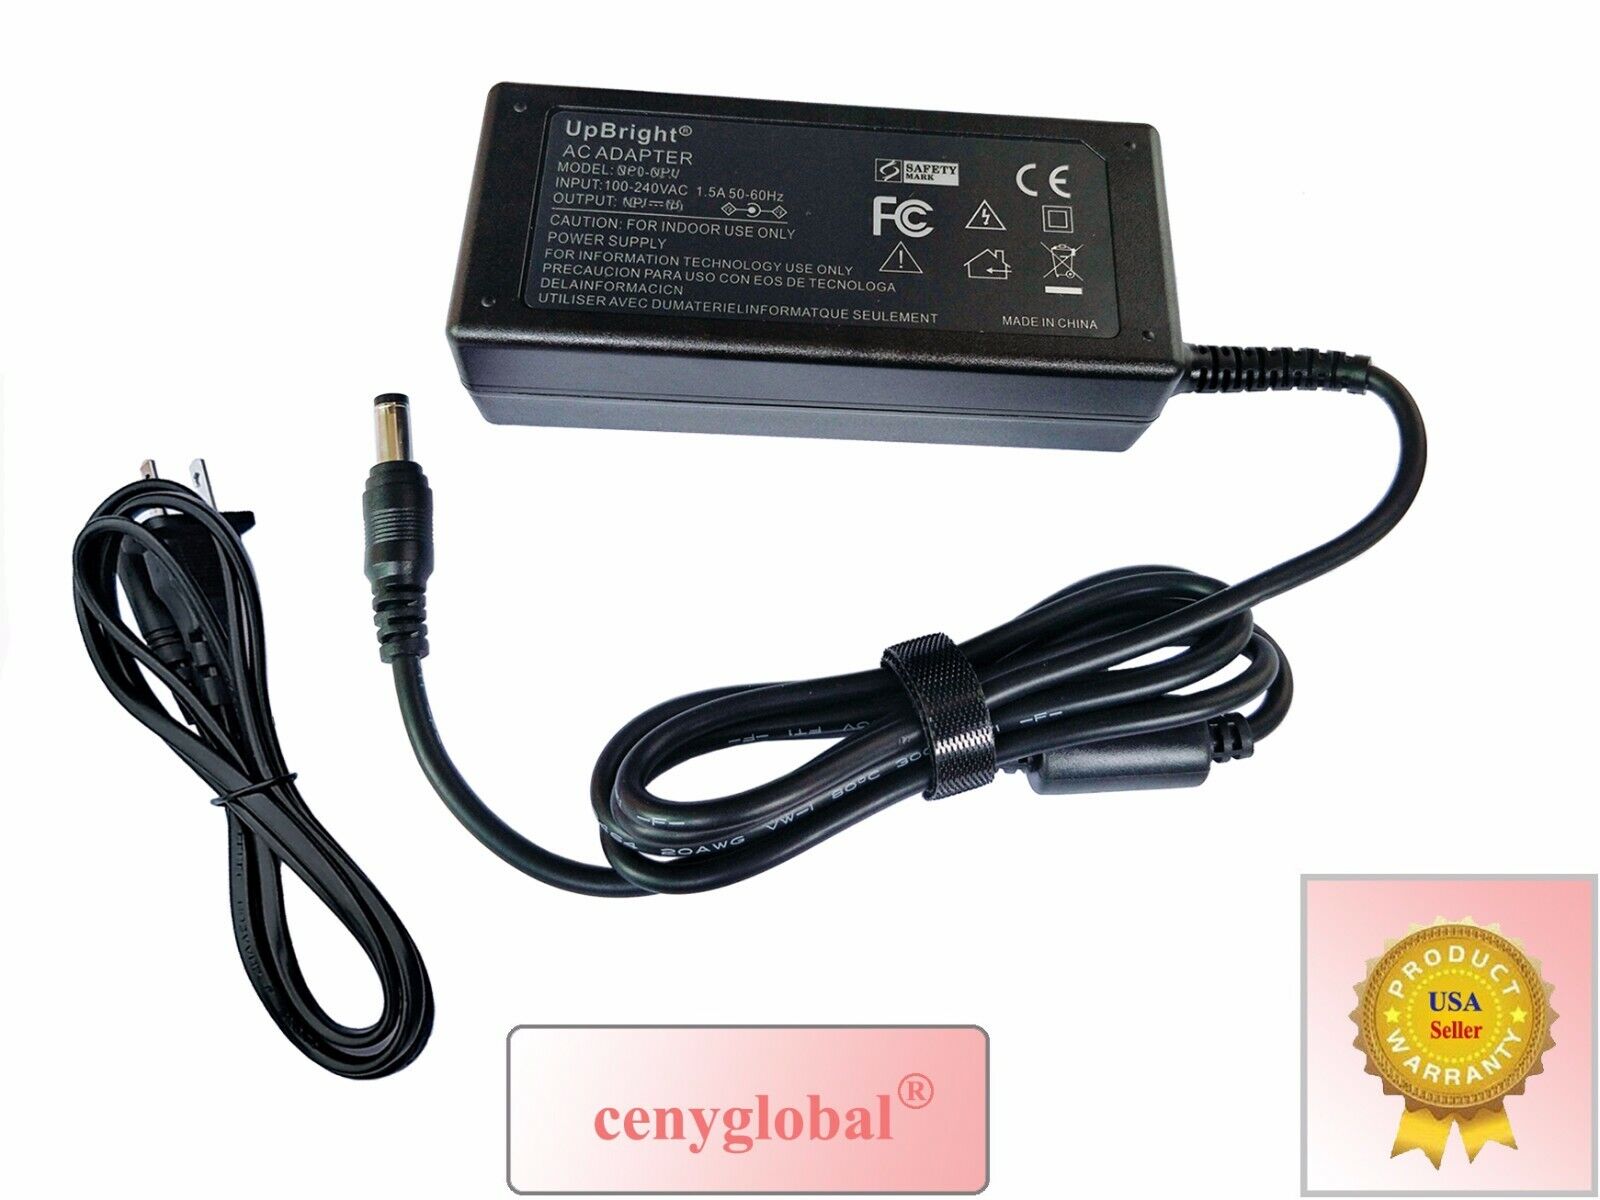 AC Power Adapter for LG 36v 8.8ah Lithium Battery Electric Bike Ebike Charger